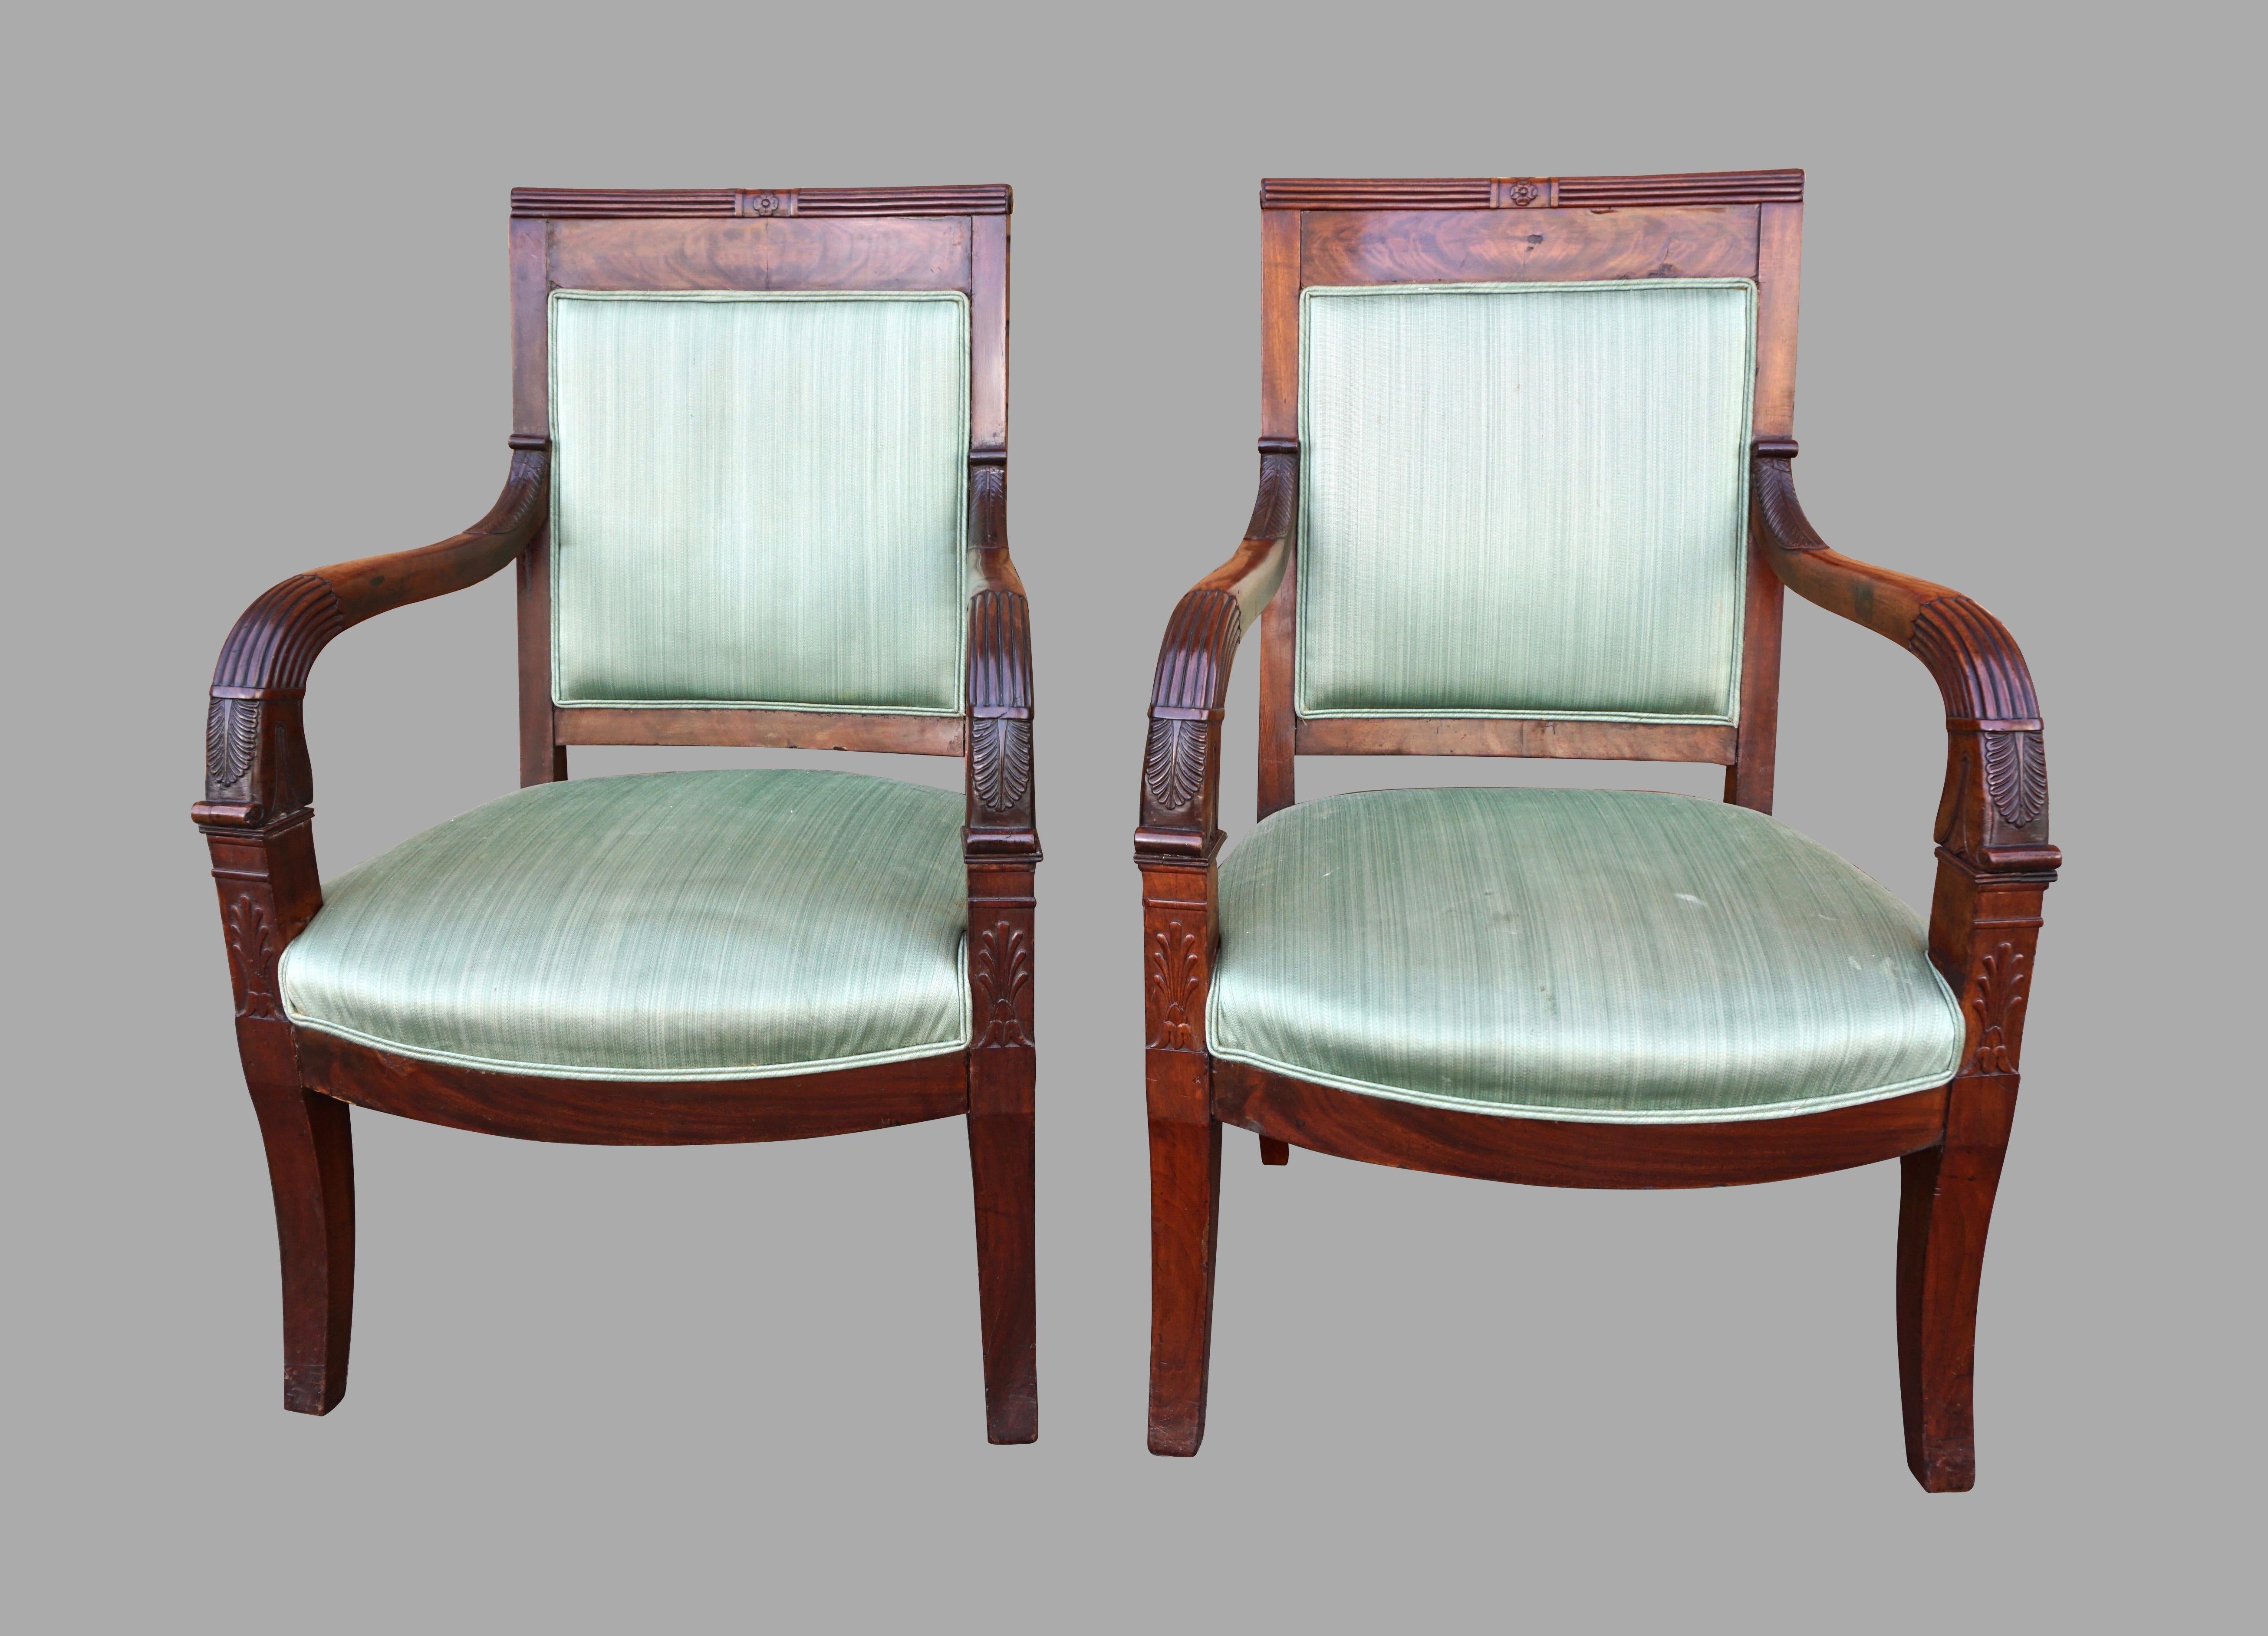 A pair of French Charles X period mahogany armchairs of typical form, the crest rails with a reeded upper edge and central carved detail, the reeded down swept arms with a well-carved stylized acanthus leaf decoration, supported on slightly curved